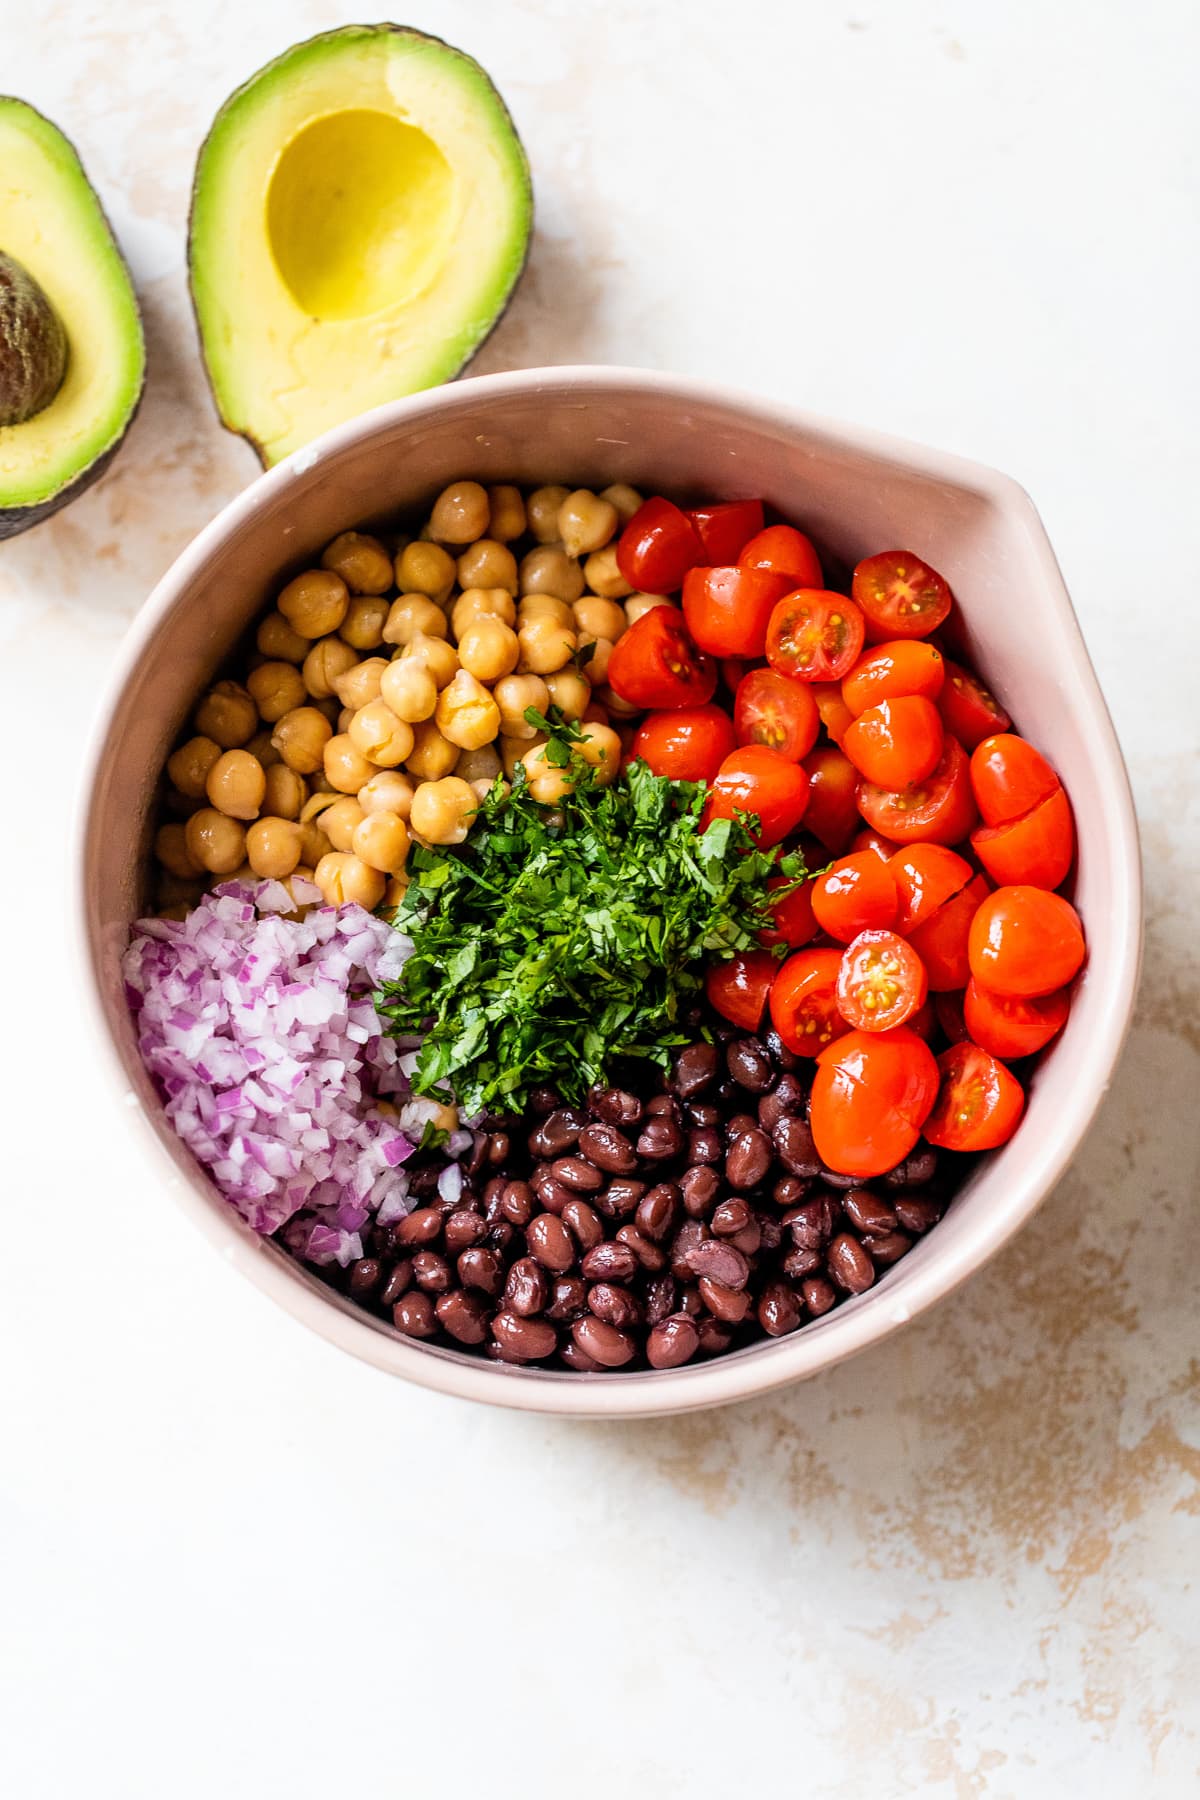 black beans, chickpeas, avocado and tomatoes with lime in a bowl.